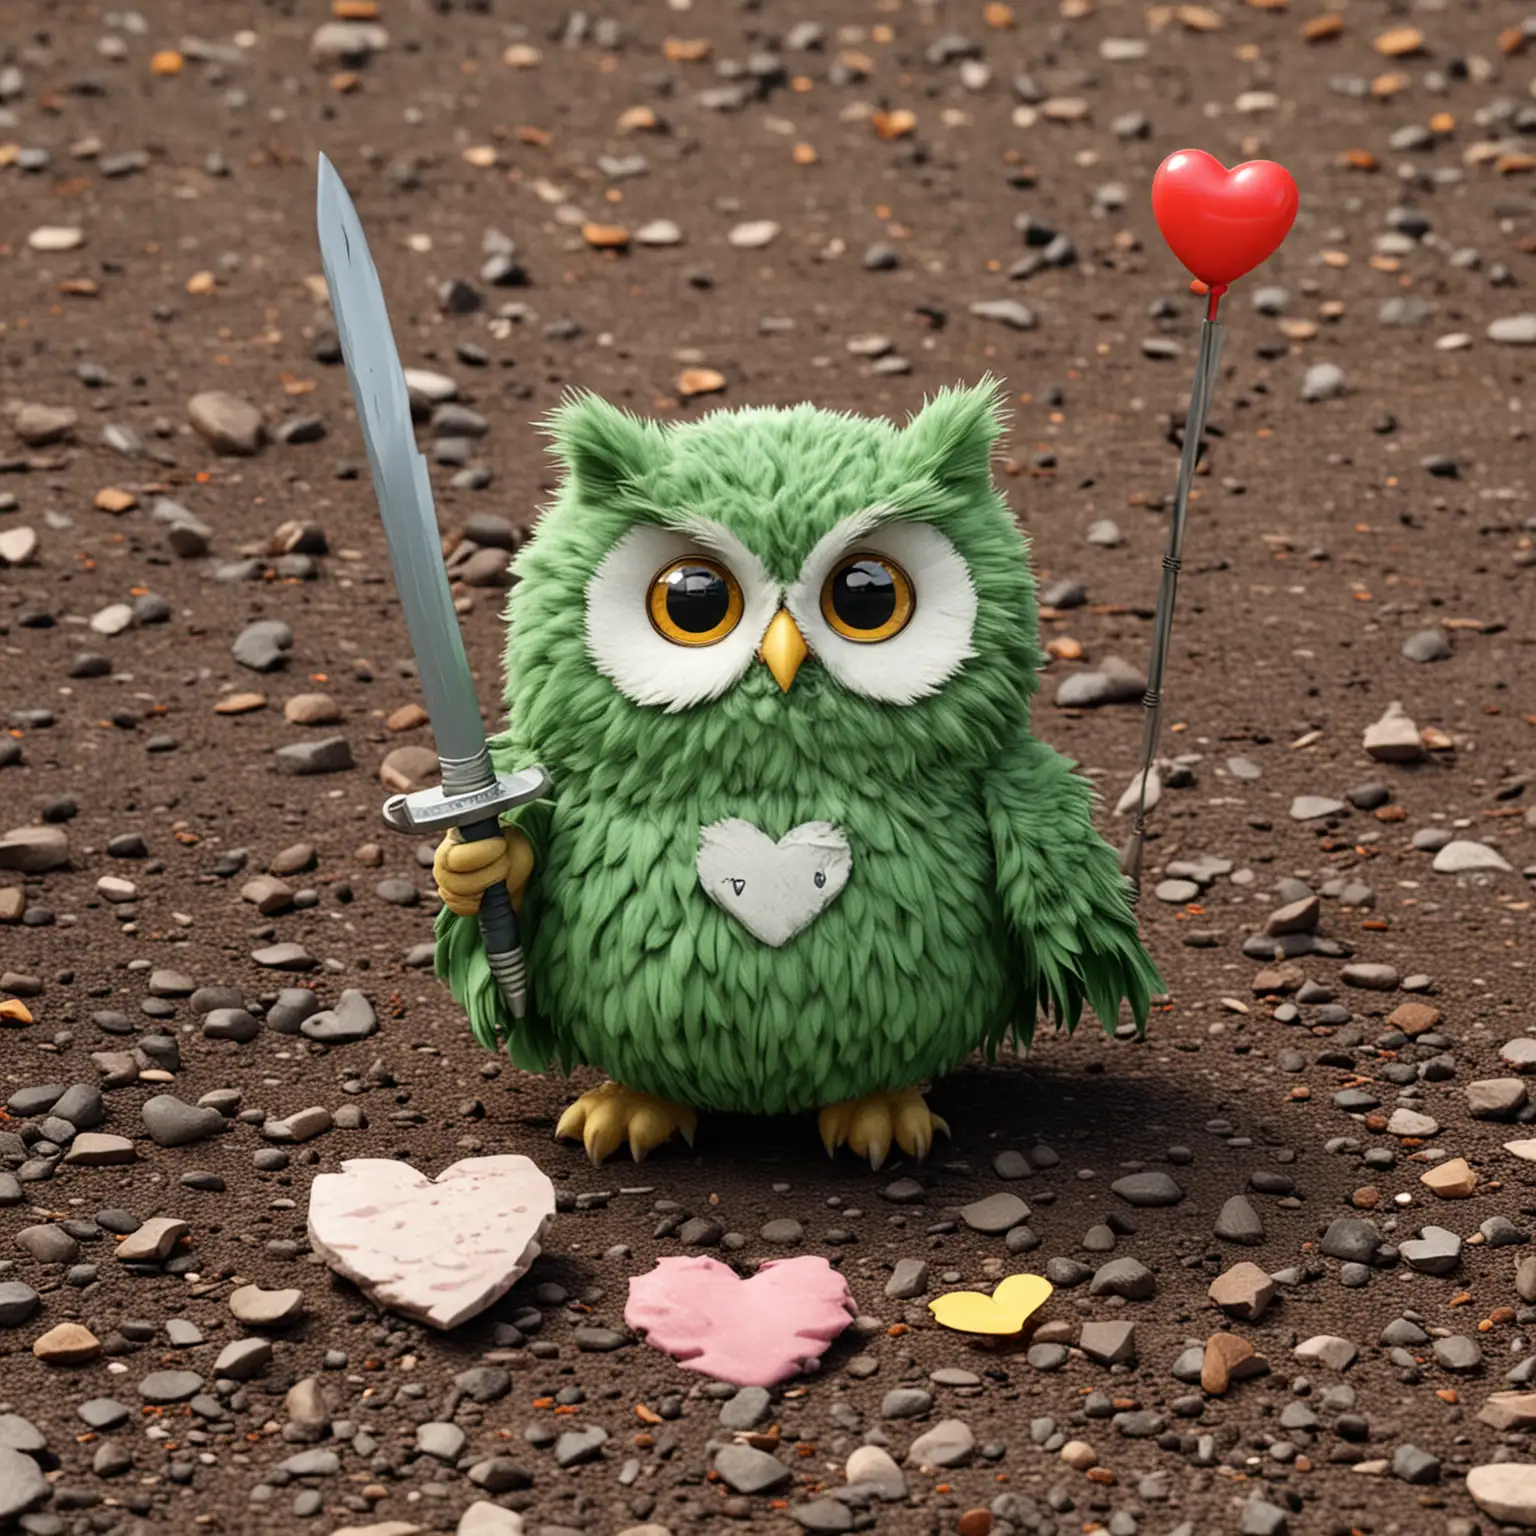 Cute-Owl-Cat-with-HeartPatterned-Feathers-and-Sword-in-Ground